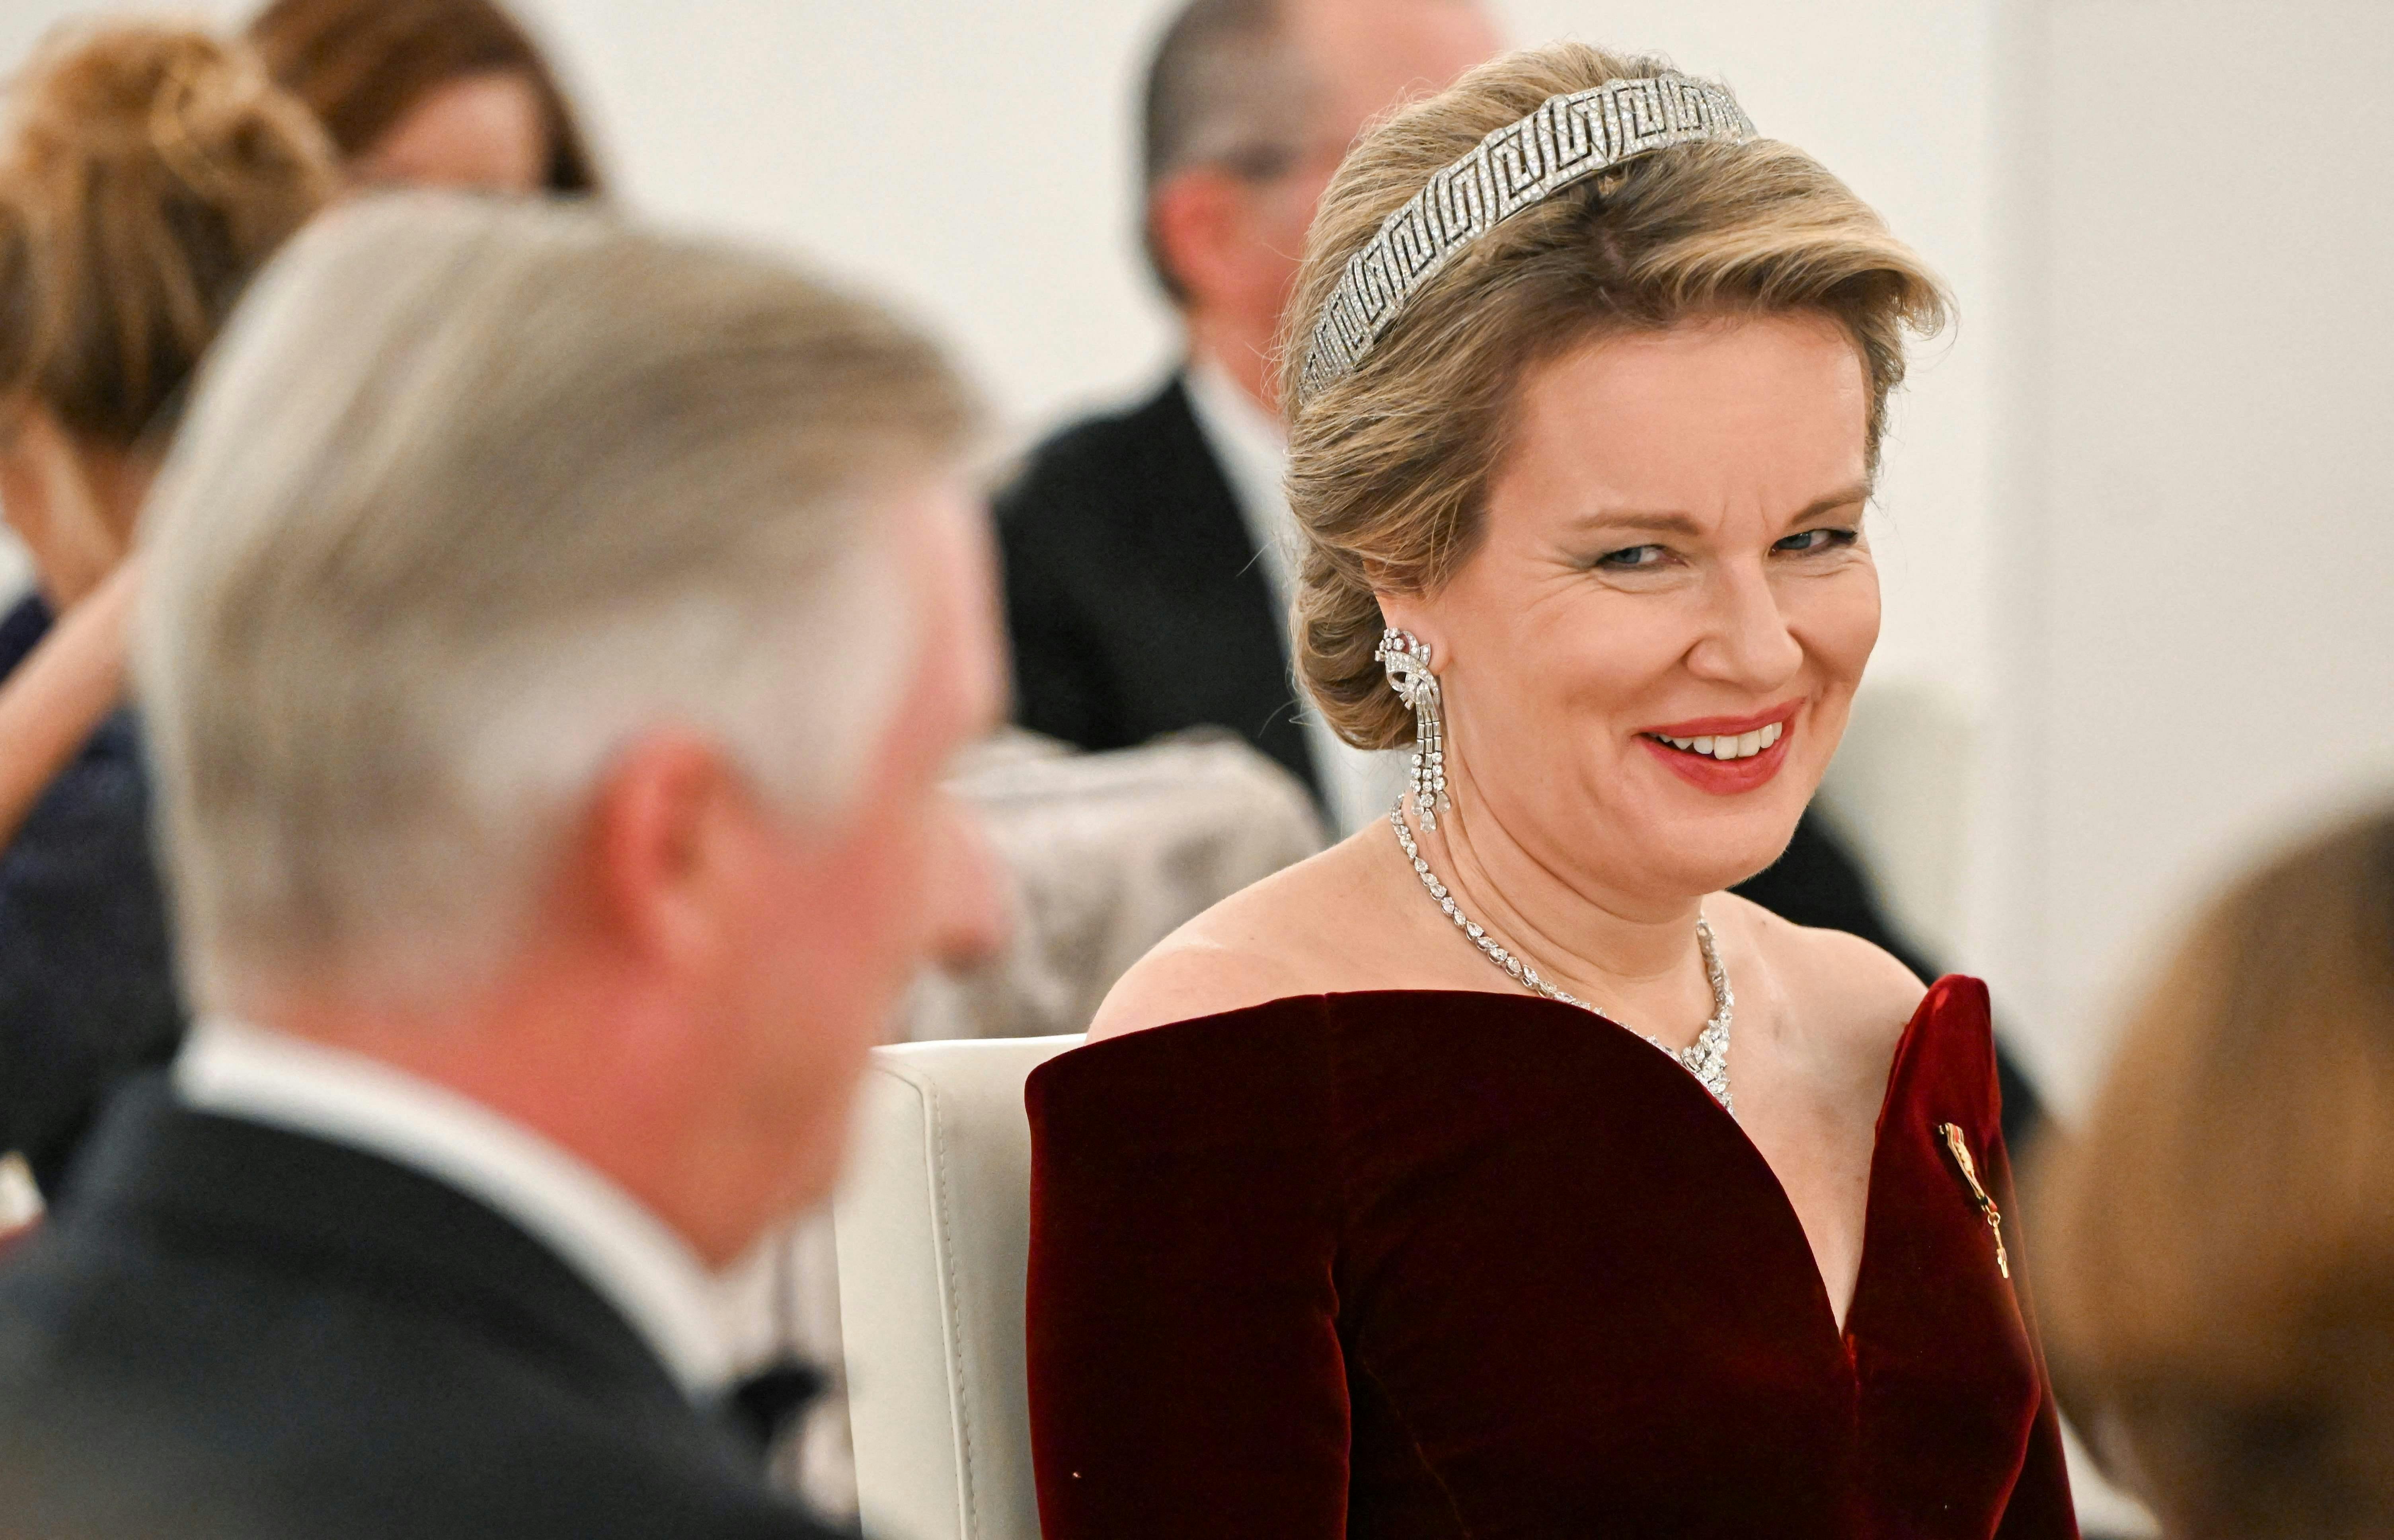 King Philippe – Filip of Belgium (L) and Queen Mathilde of Belgium are pictured during a state banquet at the presidential Bellevue Palace in Berlin, on December 5, 2023. (Photo by Jens Kalaene / POOL / AFP)